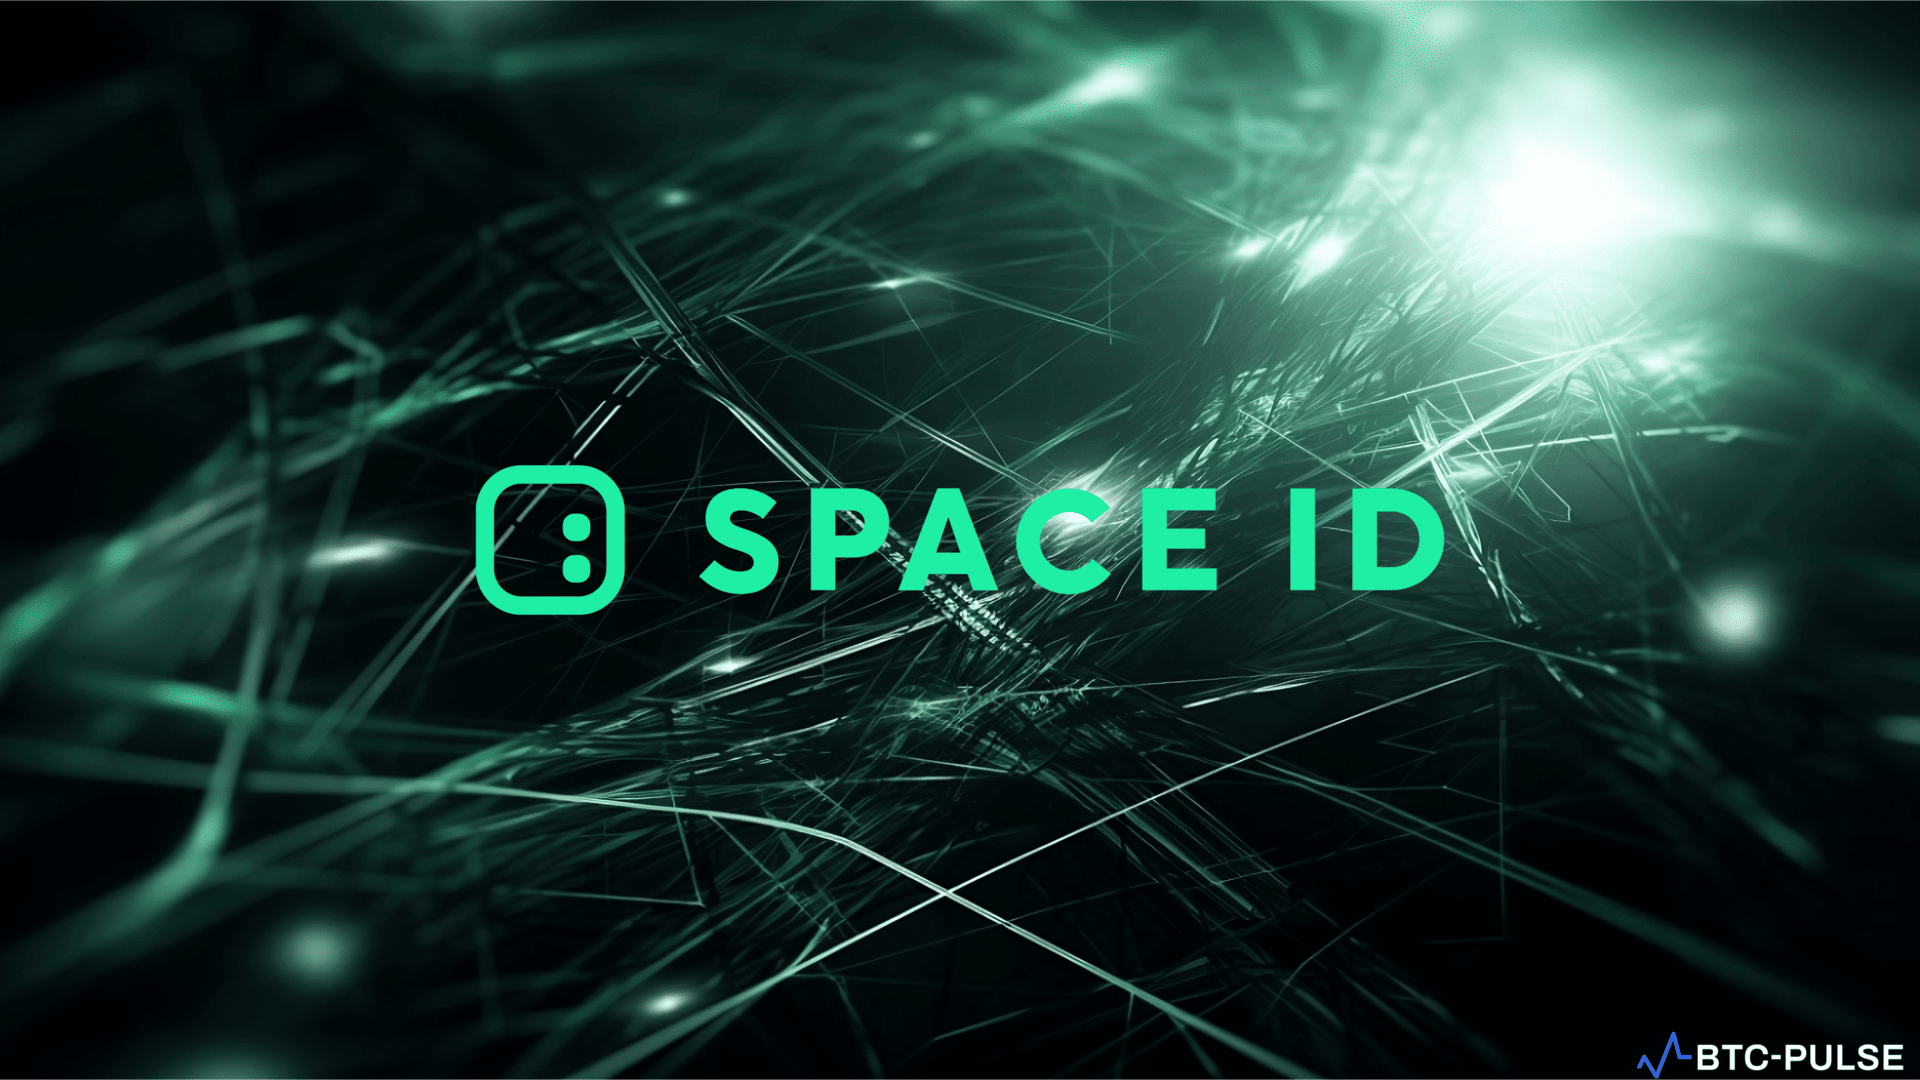 A captivating visual representation of SPACE ID's universal name service network in the vast cosmos of digital identities.